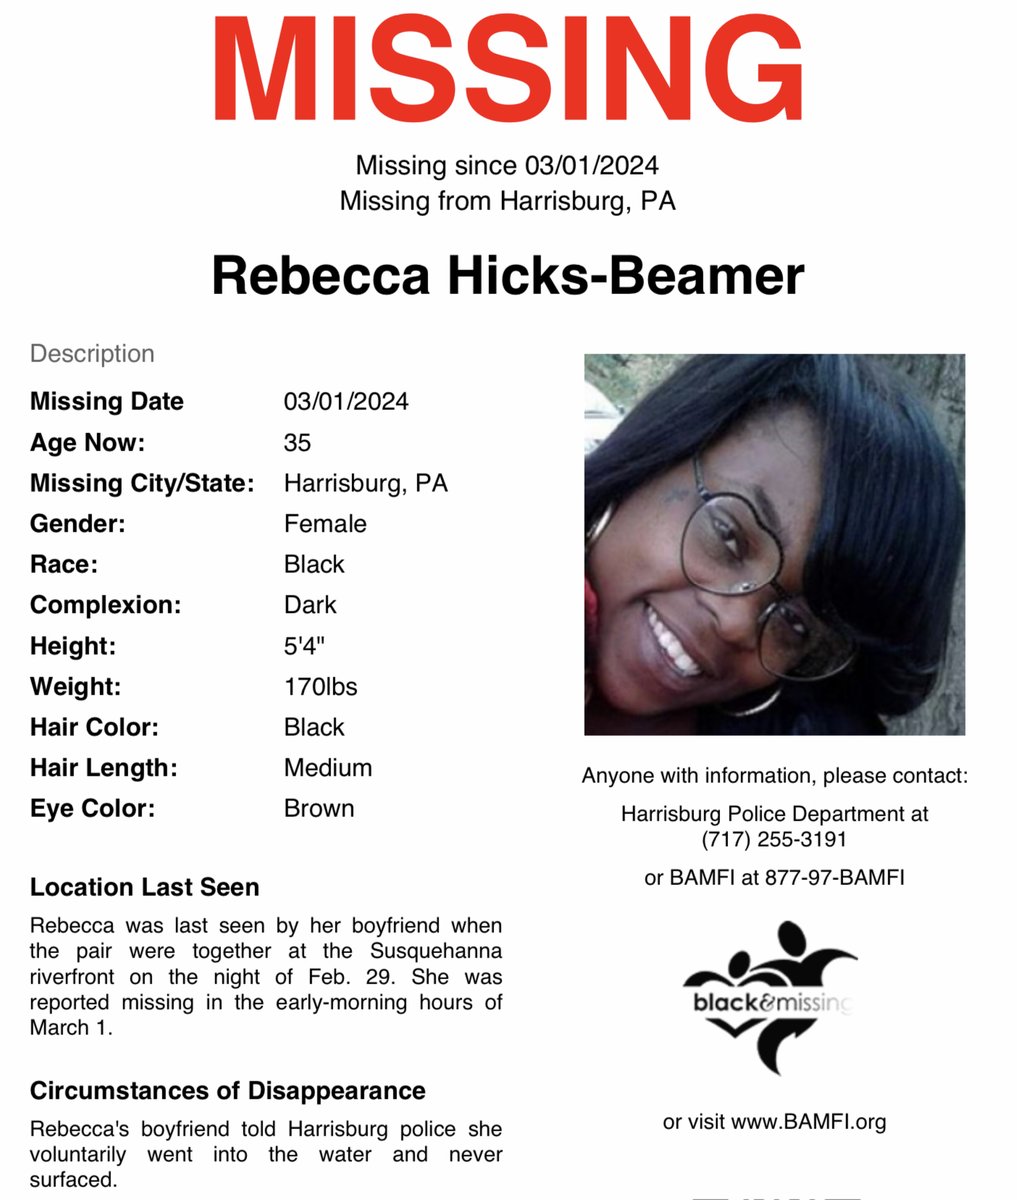 #Harrisburg, PA: 35y/o Rebecca Hicks-Beamer was last seen by her boyfriend when the pair were together at the Susquehanna riverfront on the night of Feb. 29. She was reported missing in the early-morning hours of March 1. #RebeccaHicksBeamer